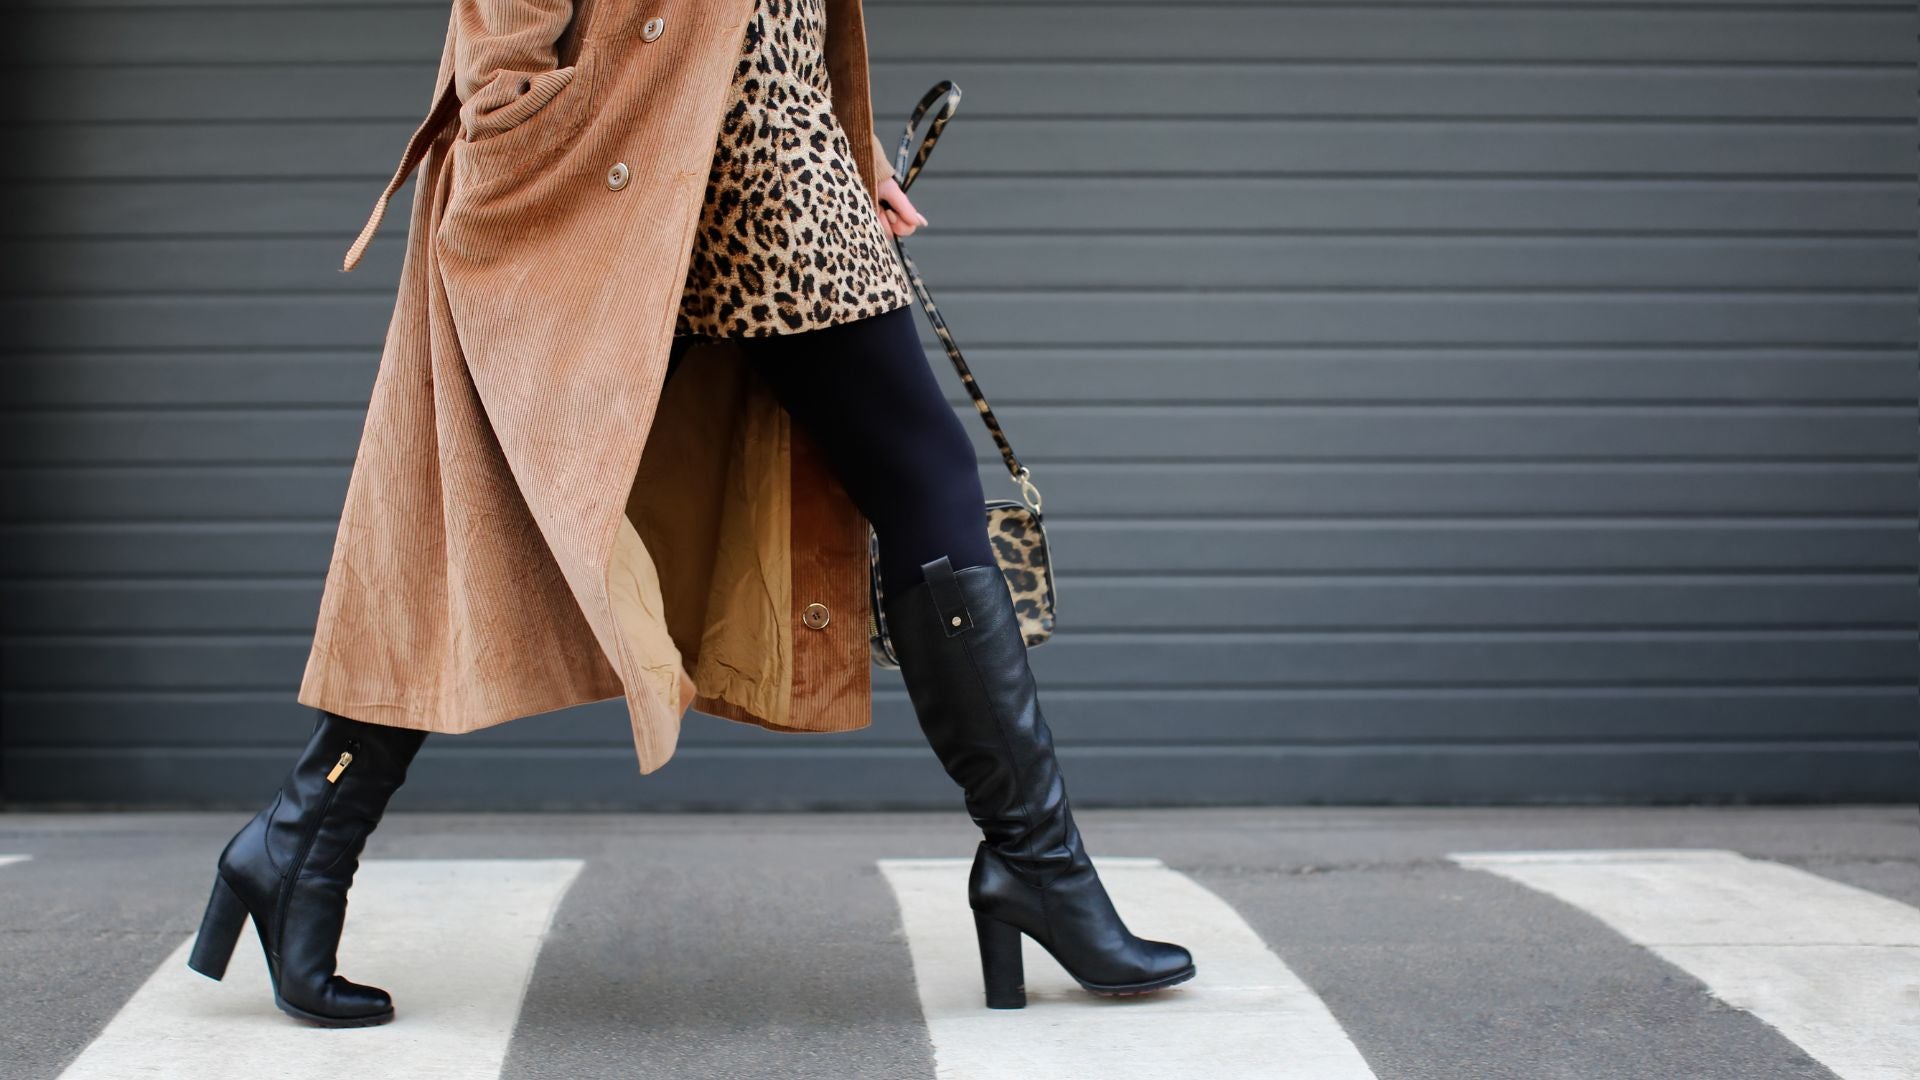 Trending: How To Wear Tall, Over-the-Knee Boots